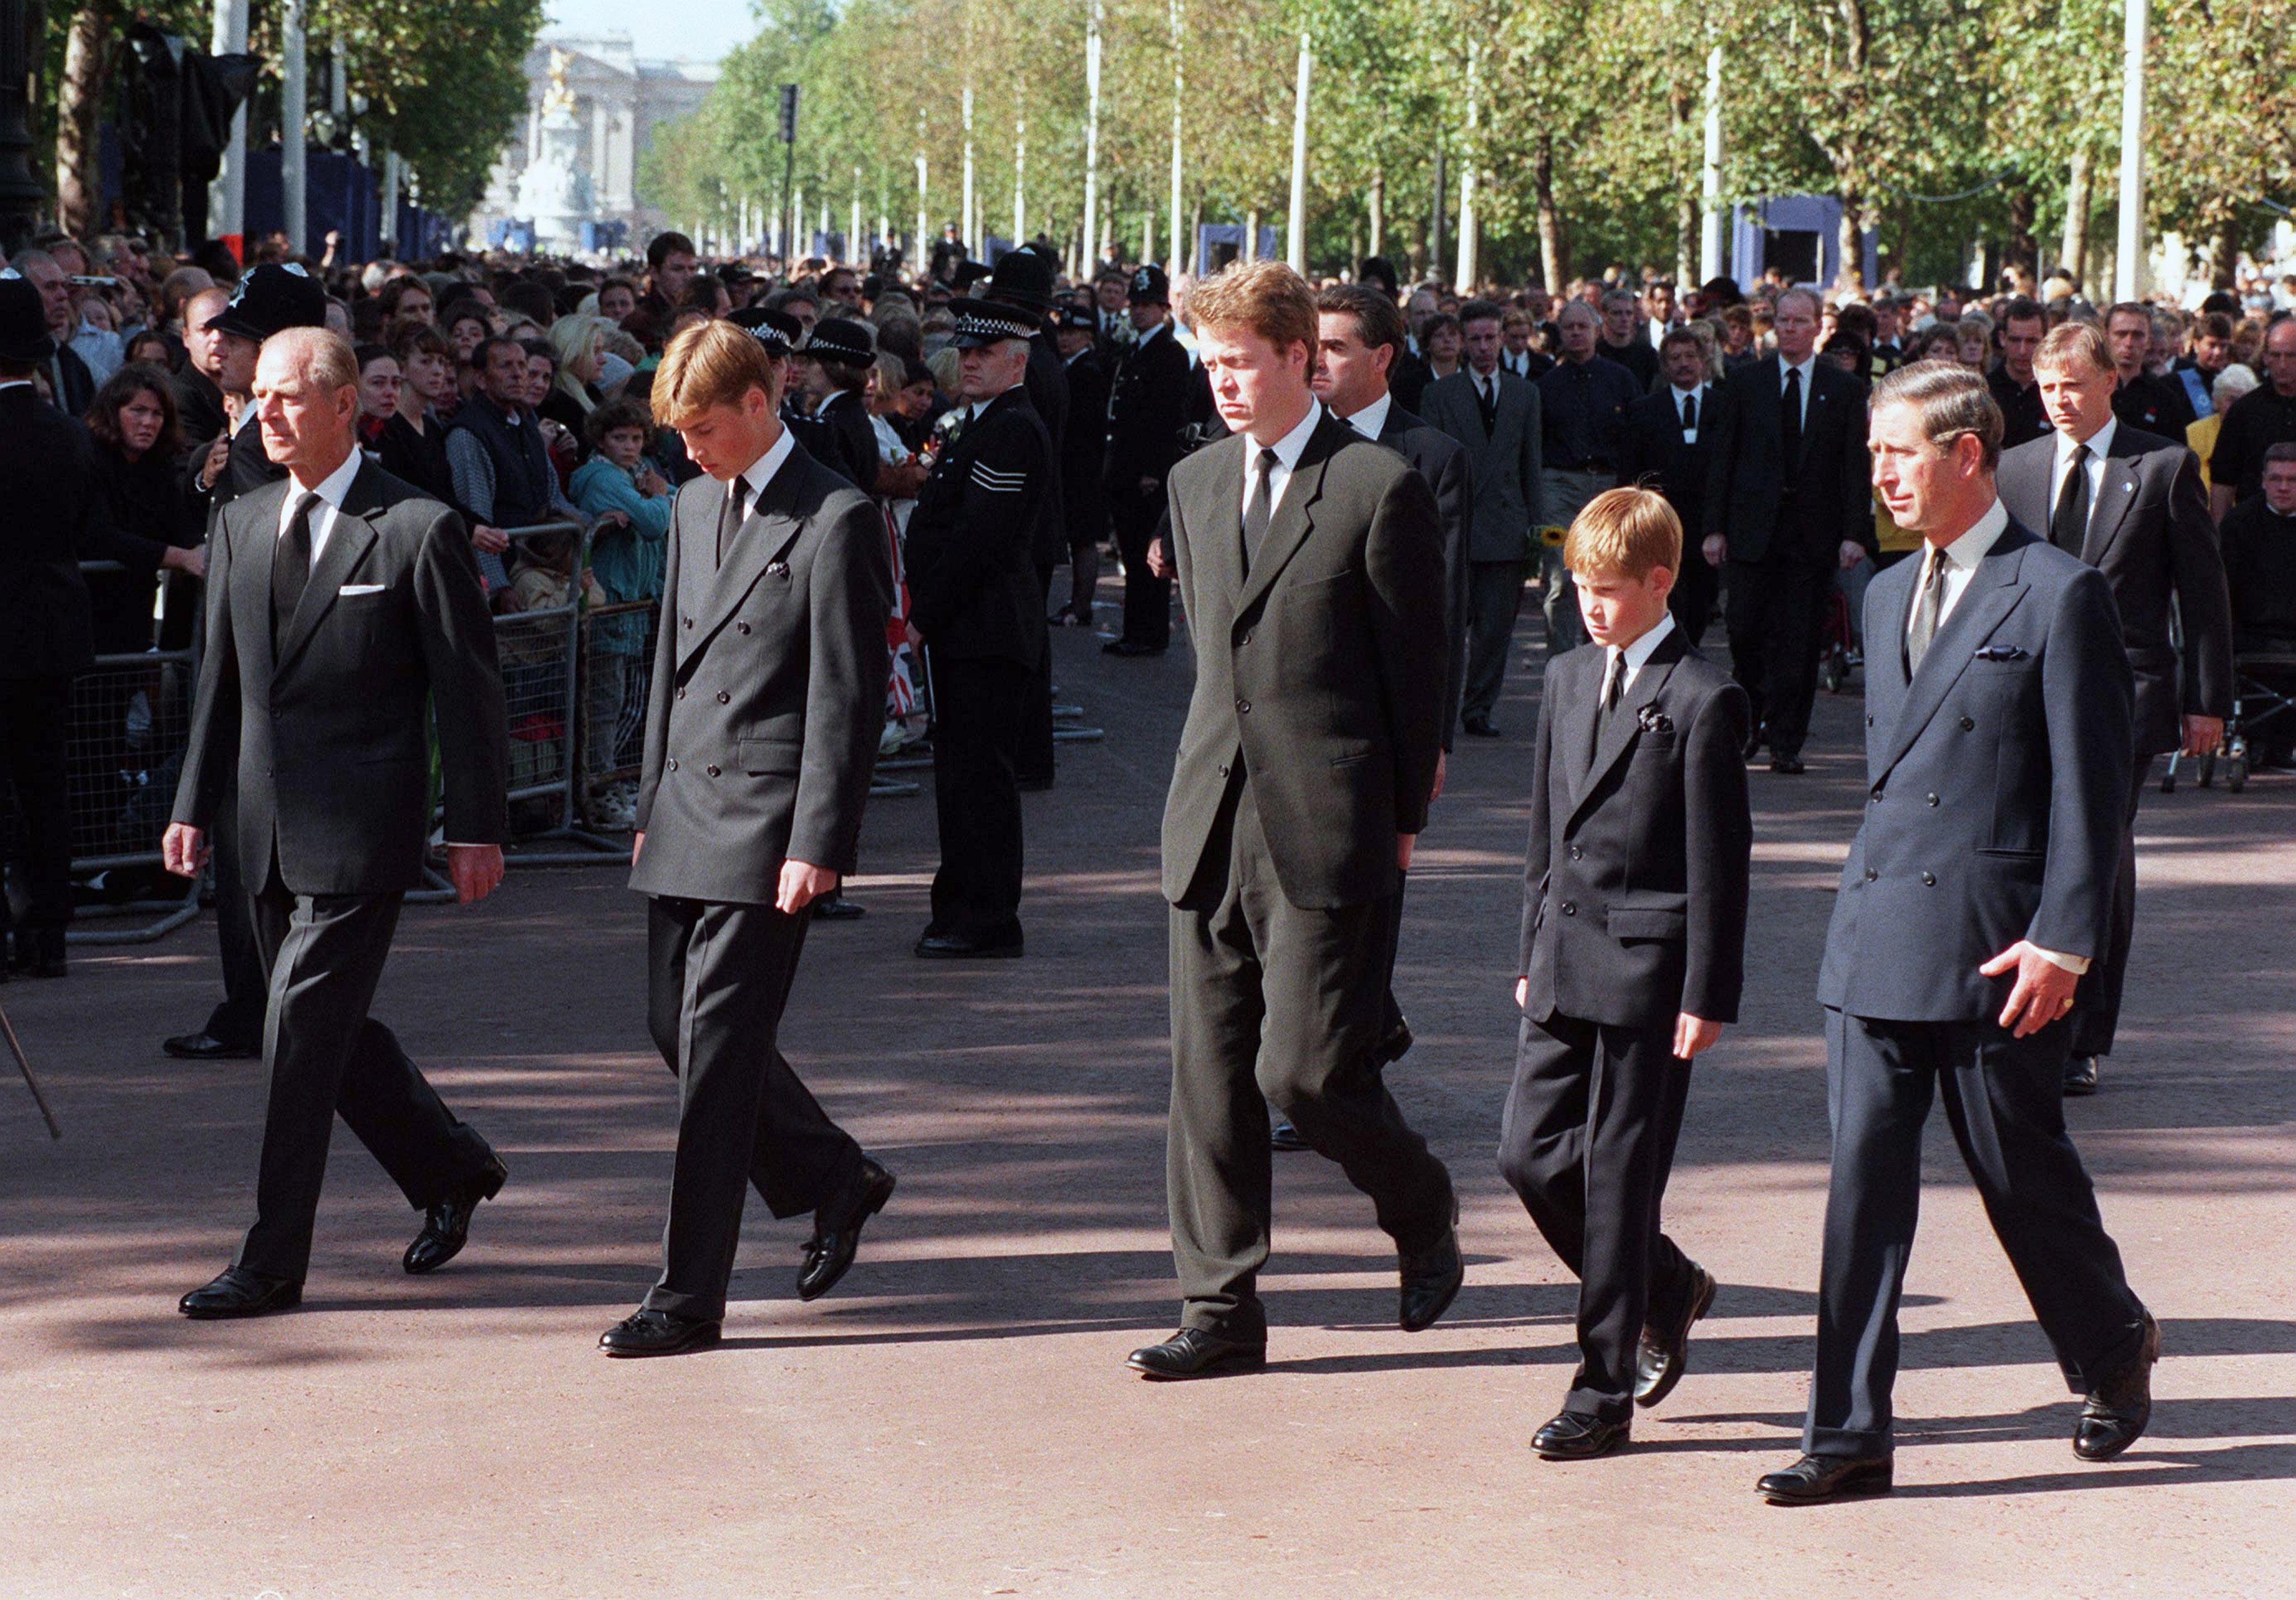 The Duke of Edinburgh, William, Earl Spencer, Harry and the Prince of Wales turn on to Horse Guards Parade as they follow behind the coffin of Diana, Princess of Wales (Tony Harris/PA)